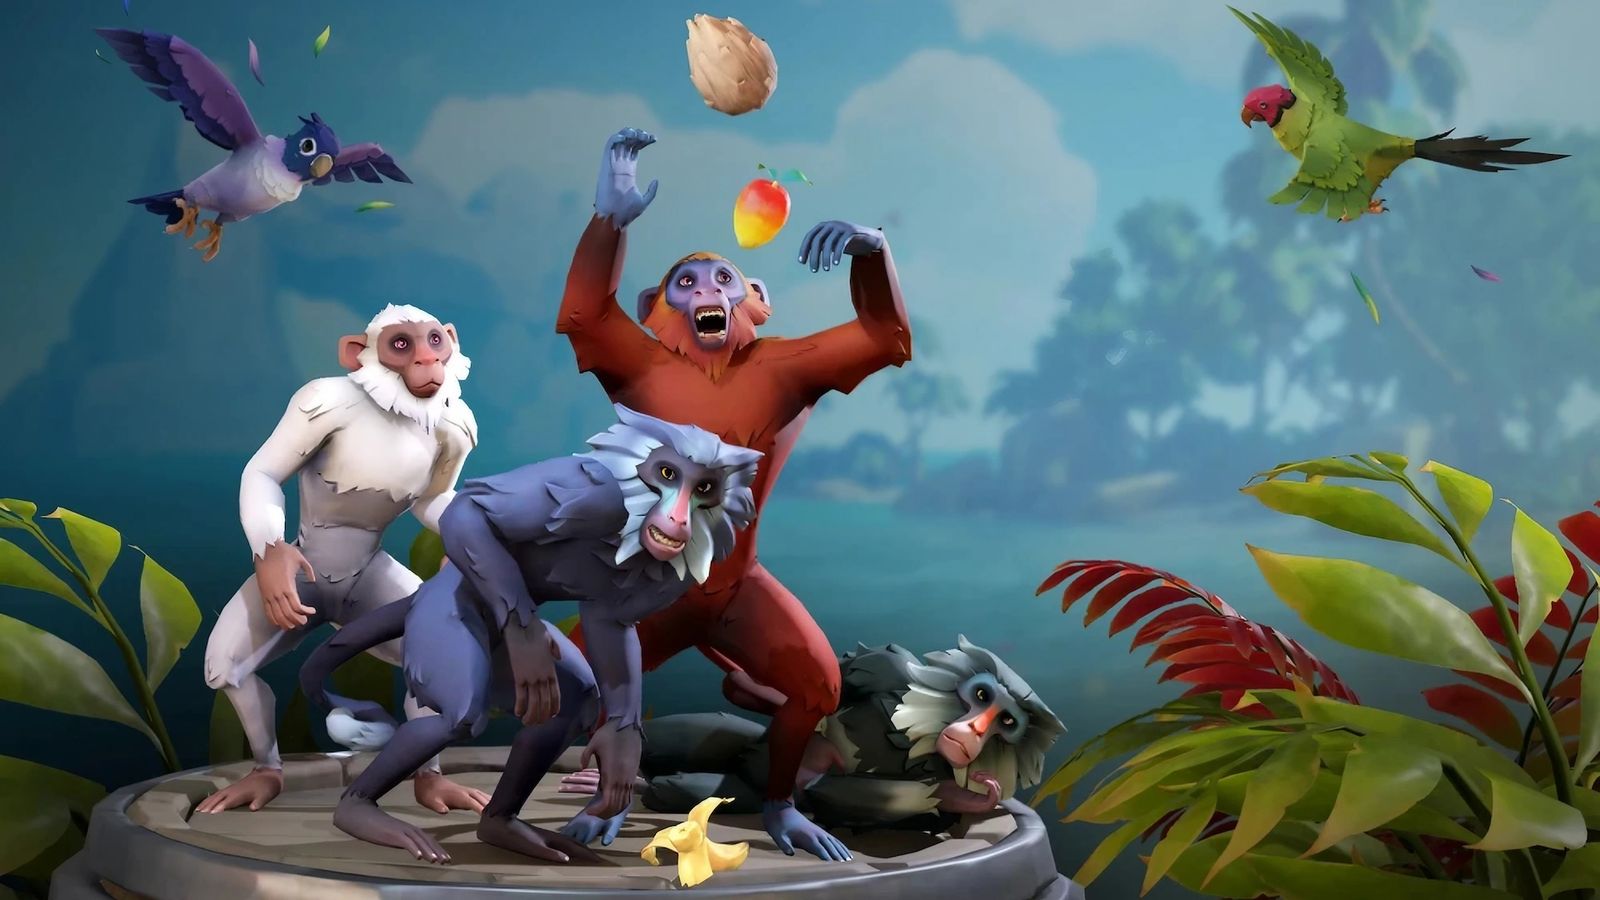 Sea of Thieves monkeys standing on platform with birds flying overhead